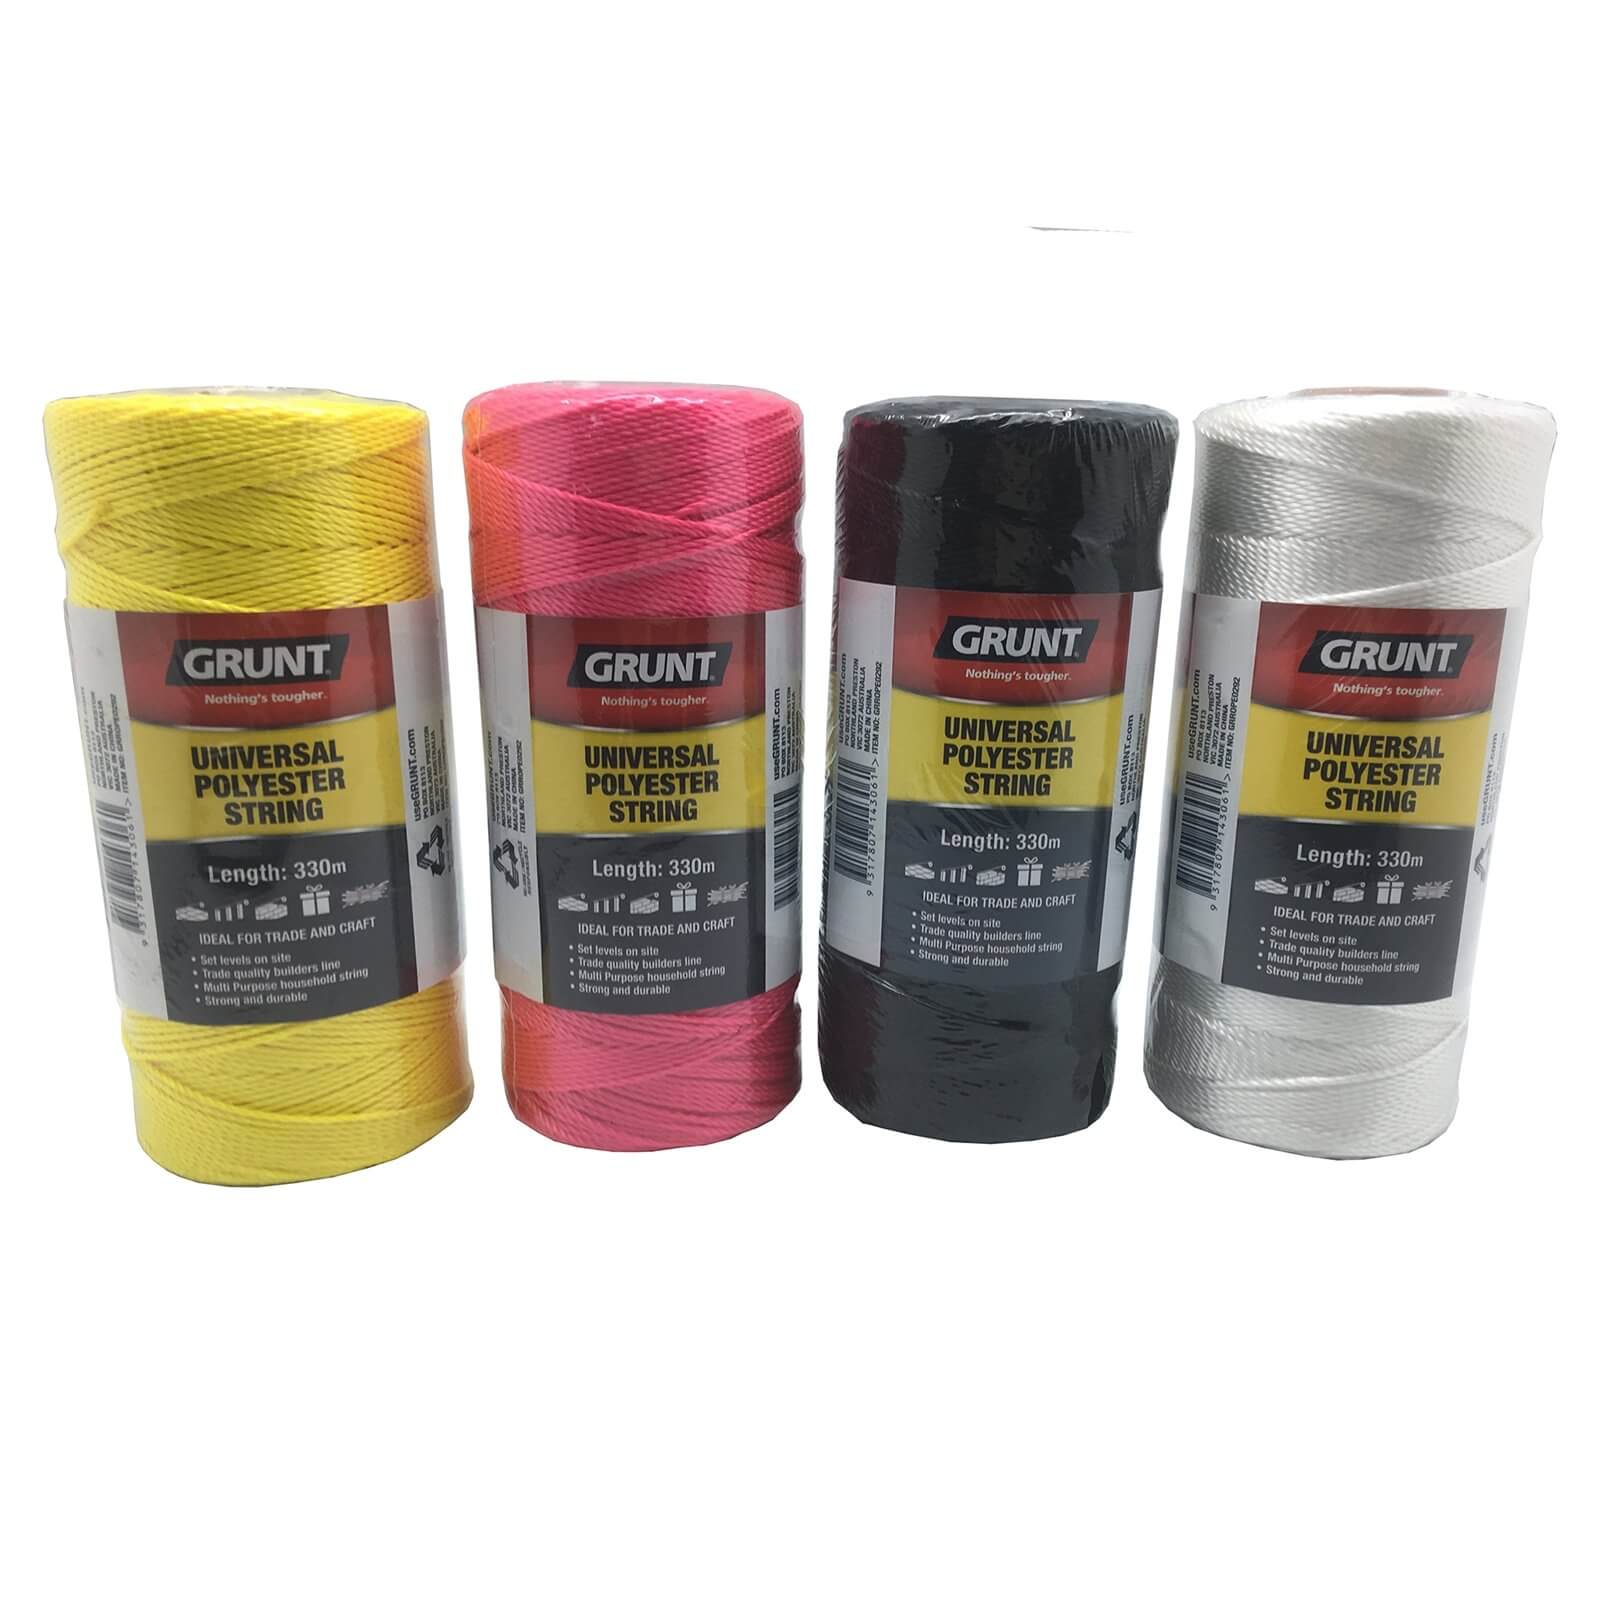 Grunt String Polyester - 330m Assorted